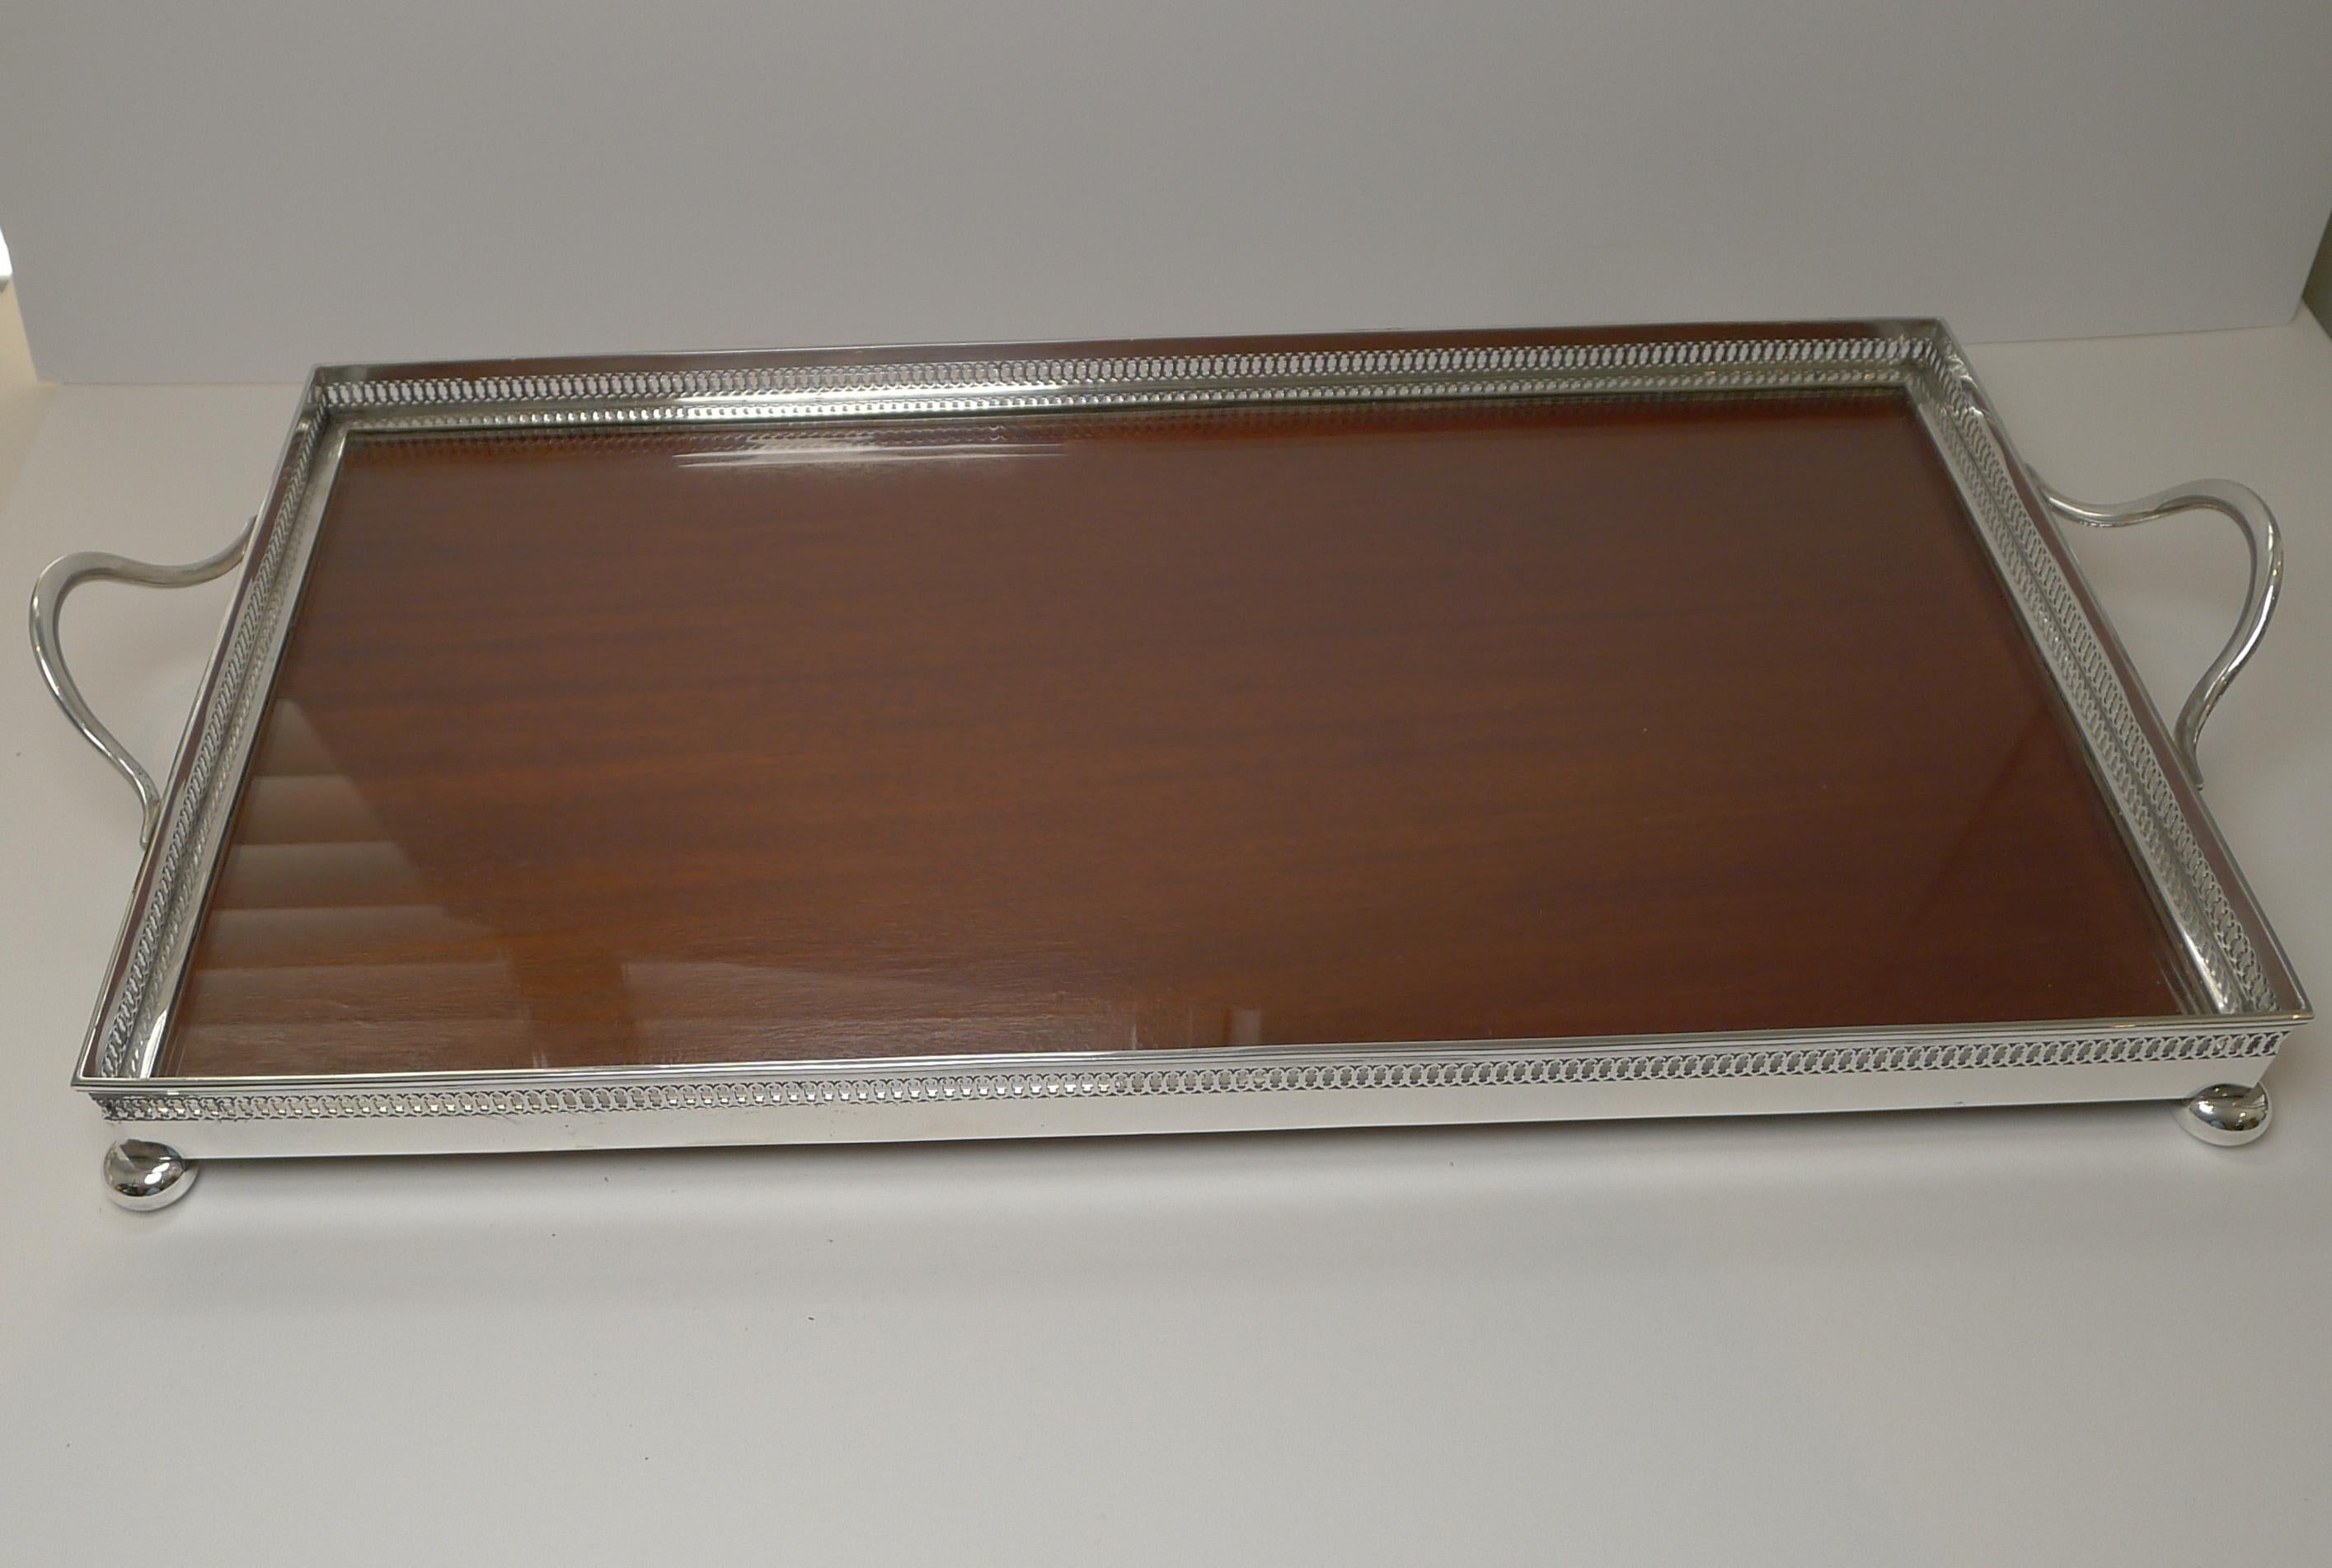 A top quality Edwardian serving or drinks tray by a top quality English silversmith, John Grinsell & Sons dating to c.1900.

The tray is made from a heavy solid piece of Mahogany fitted into the silver plated galleried tray topped with glass,